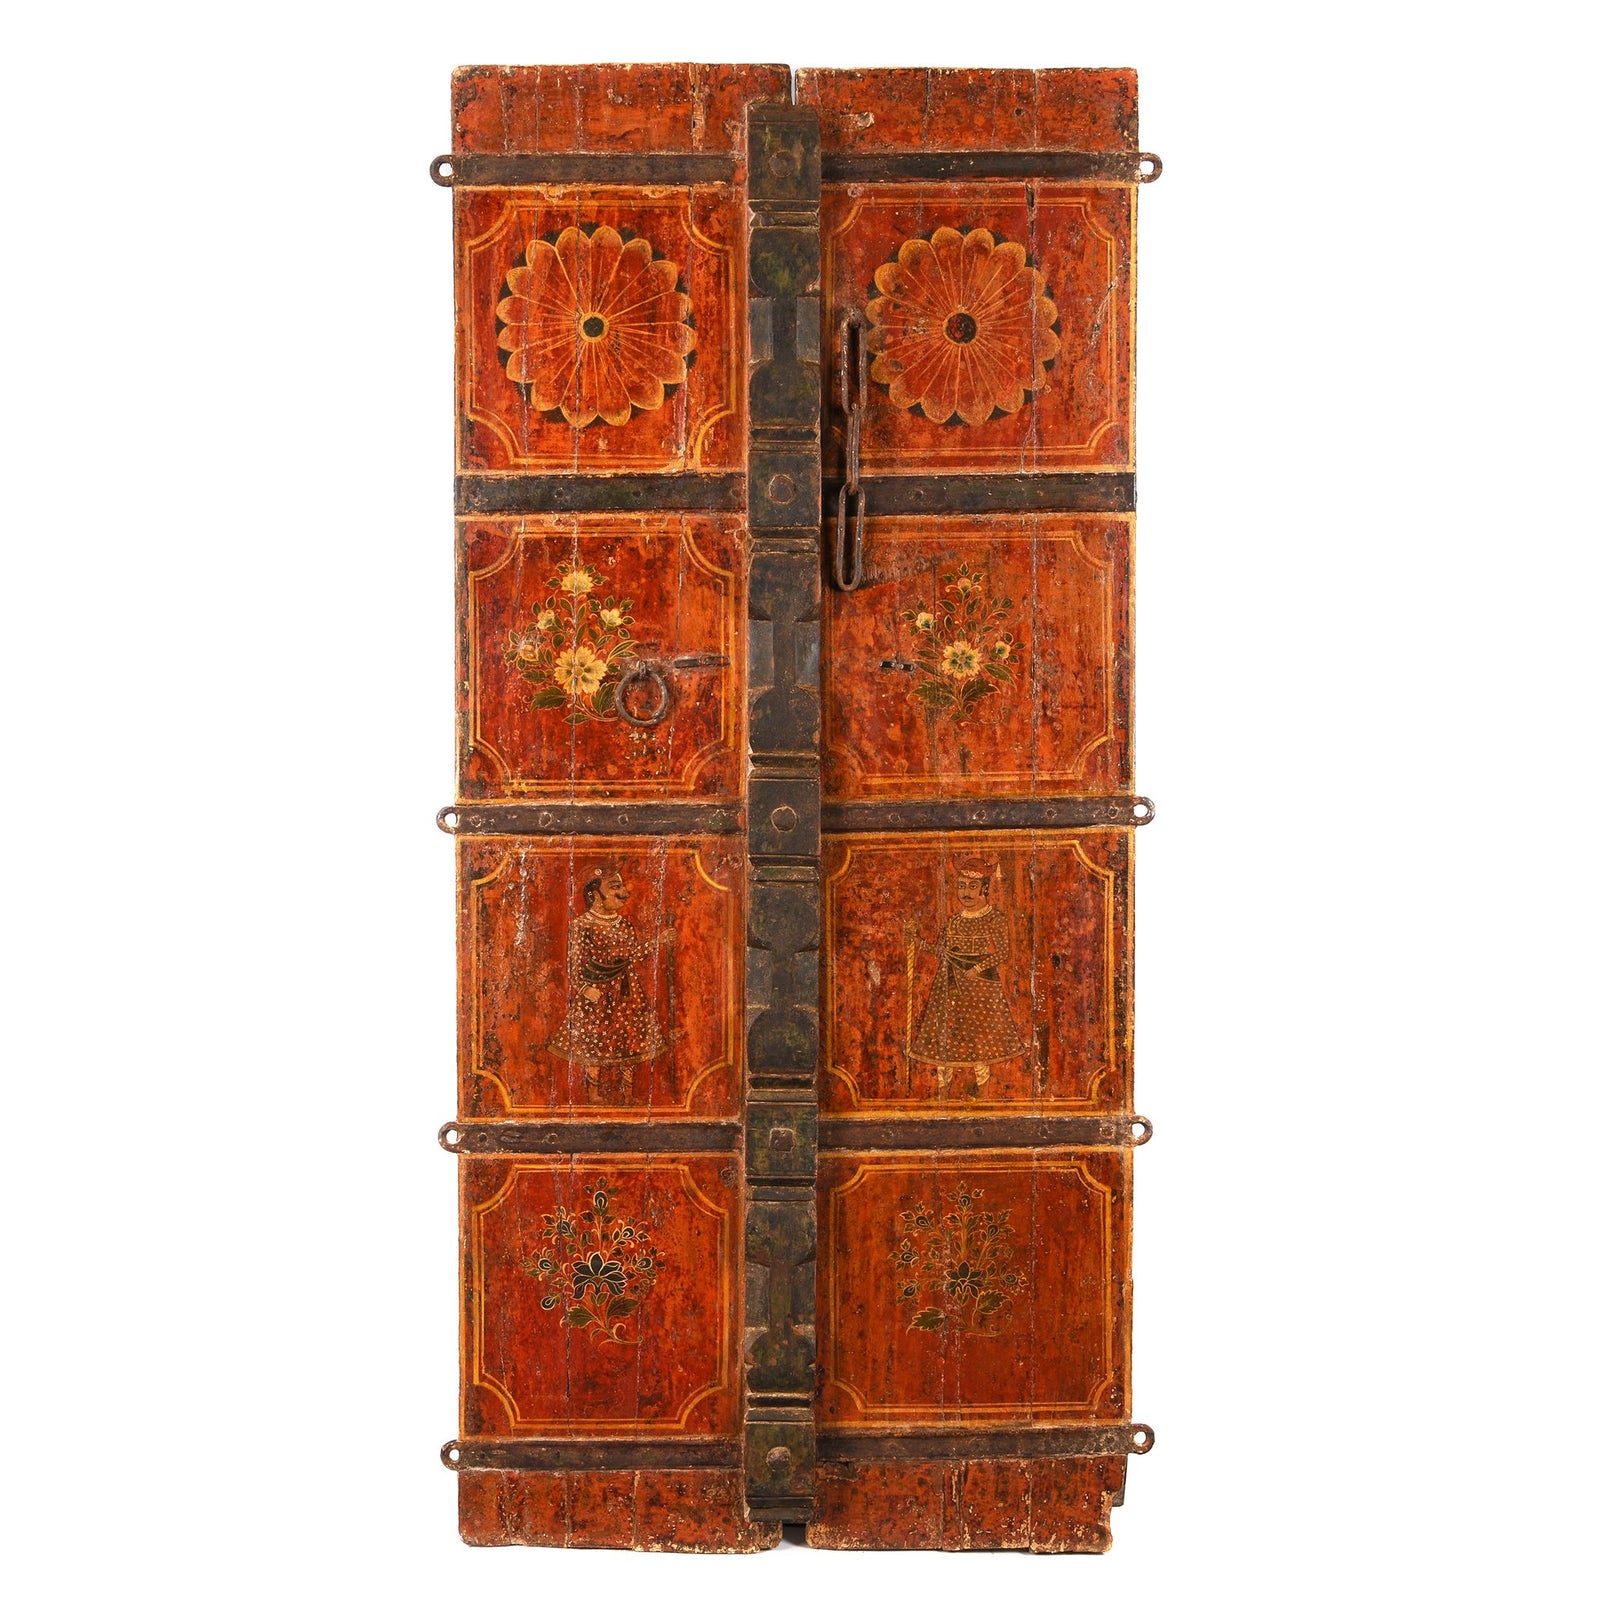 Painted Teak Door From Rajasthan - 19thC - 92 x 6 x 165 (wxdxh cms) - A6317